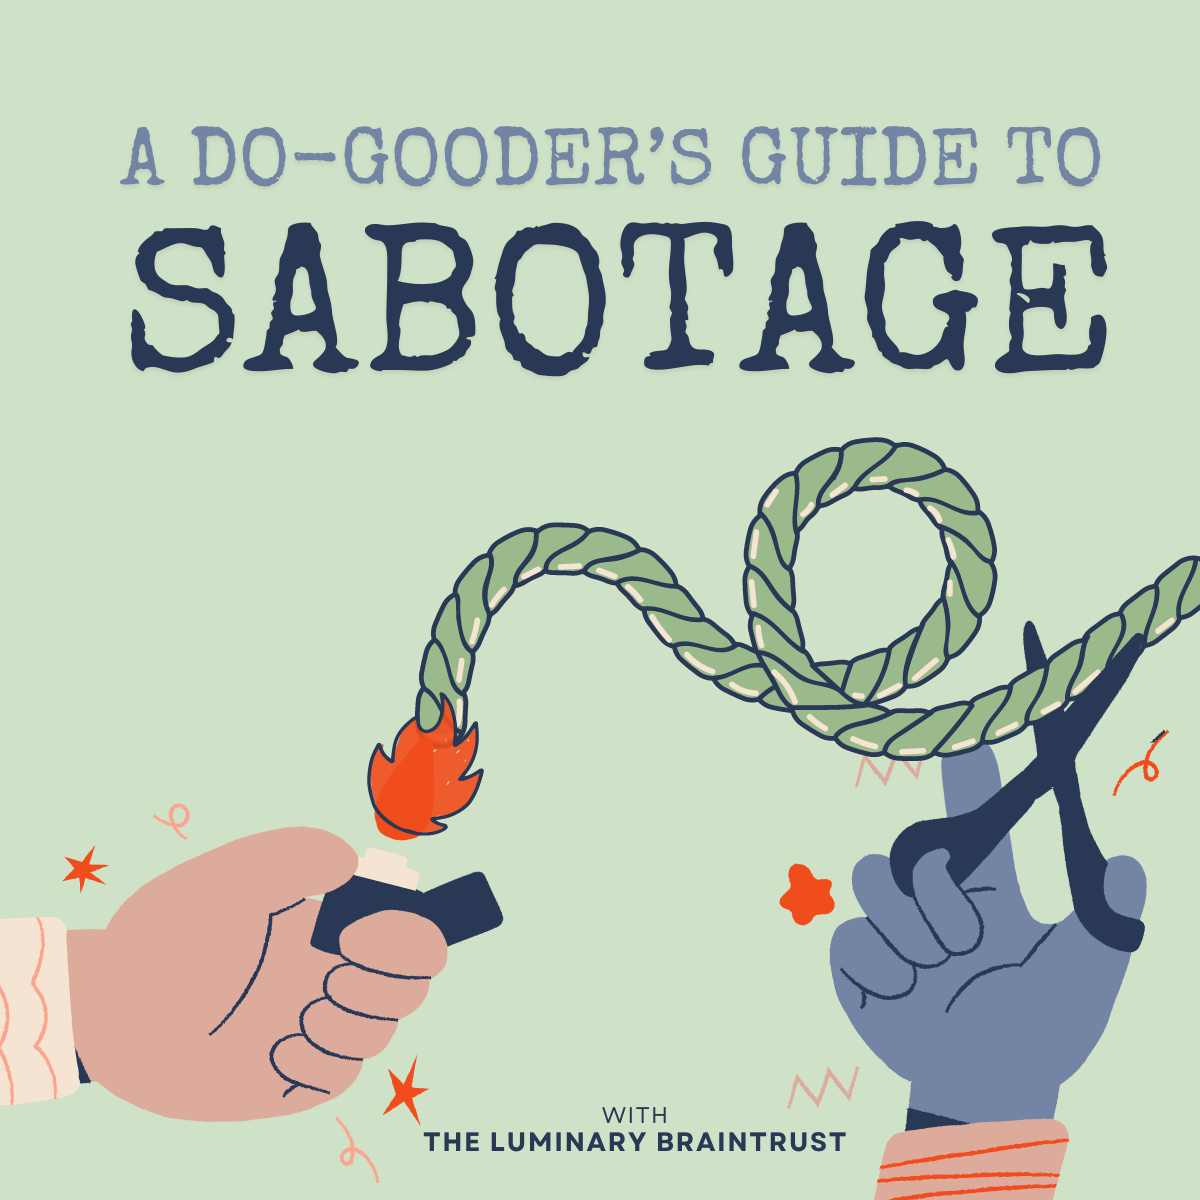 a do-gooder's guide to sabotage with the luminary braintrust. hand igniting a fuse while another hand snips the fuse to stop an implied explosion